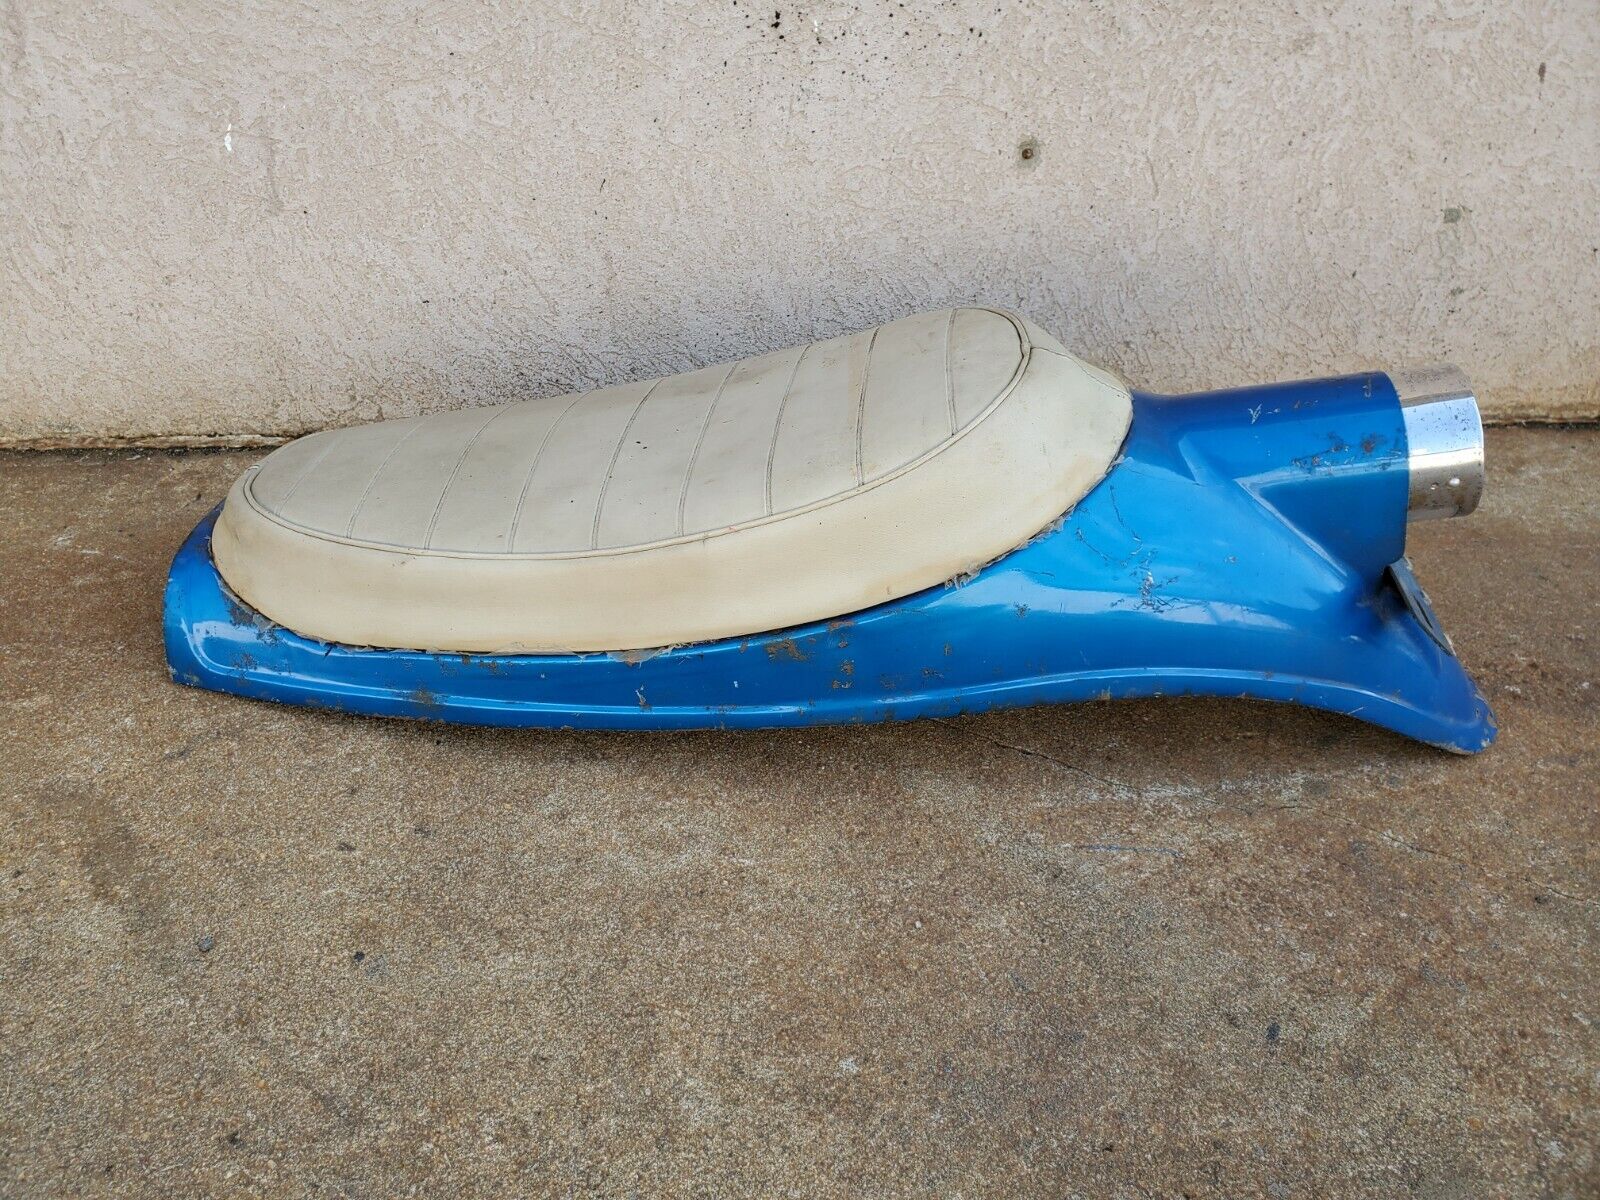 Vintage Italian Benelli Mojave 260 360  Seat Fender Fairing Body Moped Scooter 